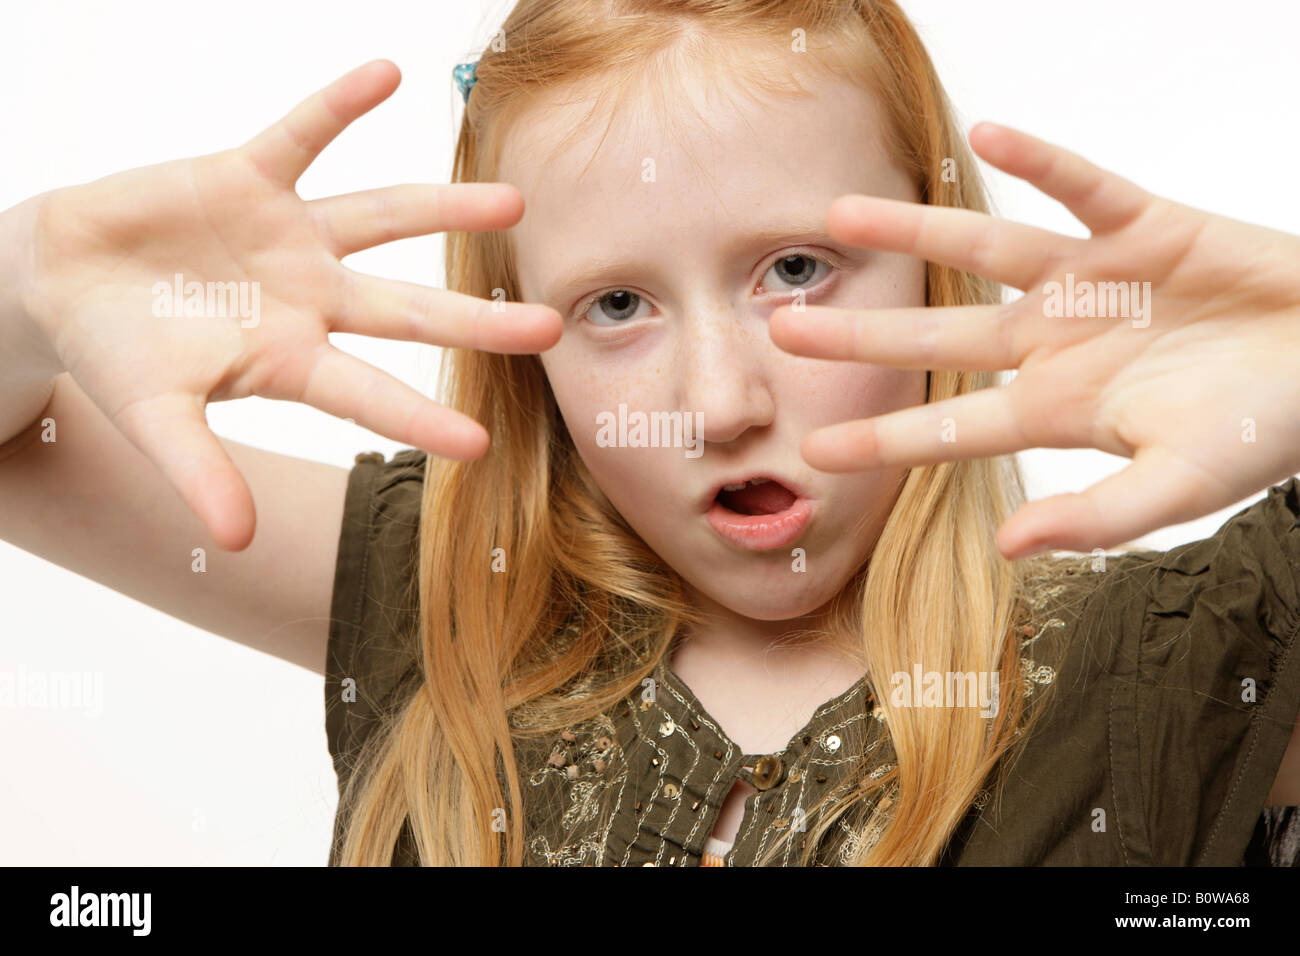 8-year-old girl, hands up showing her palms Stock Photo - Alamy